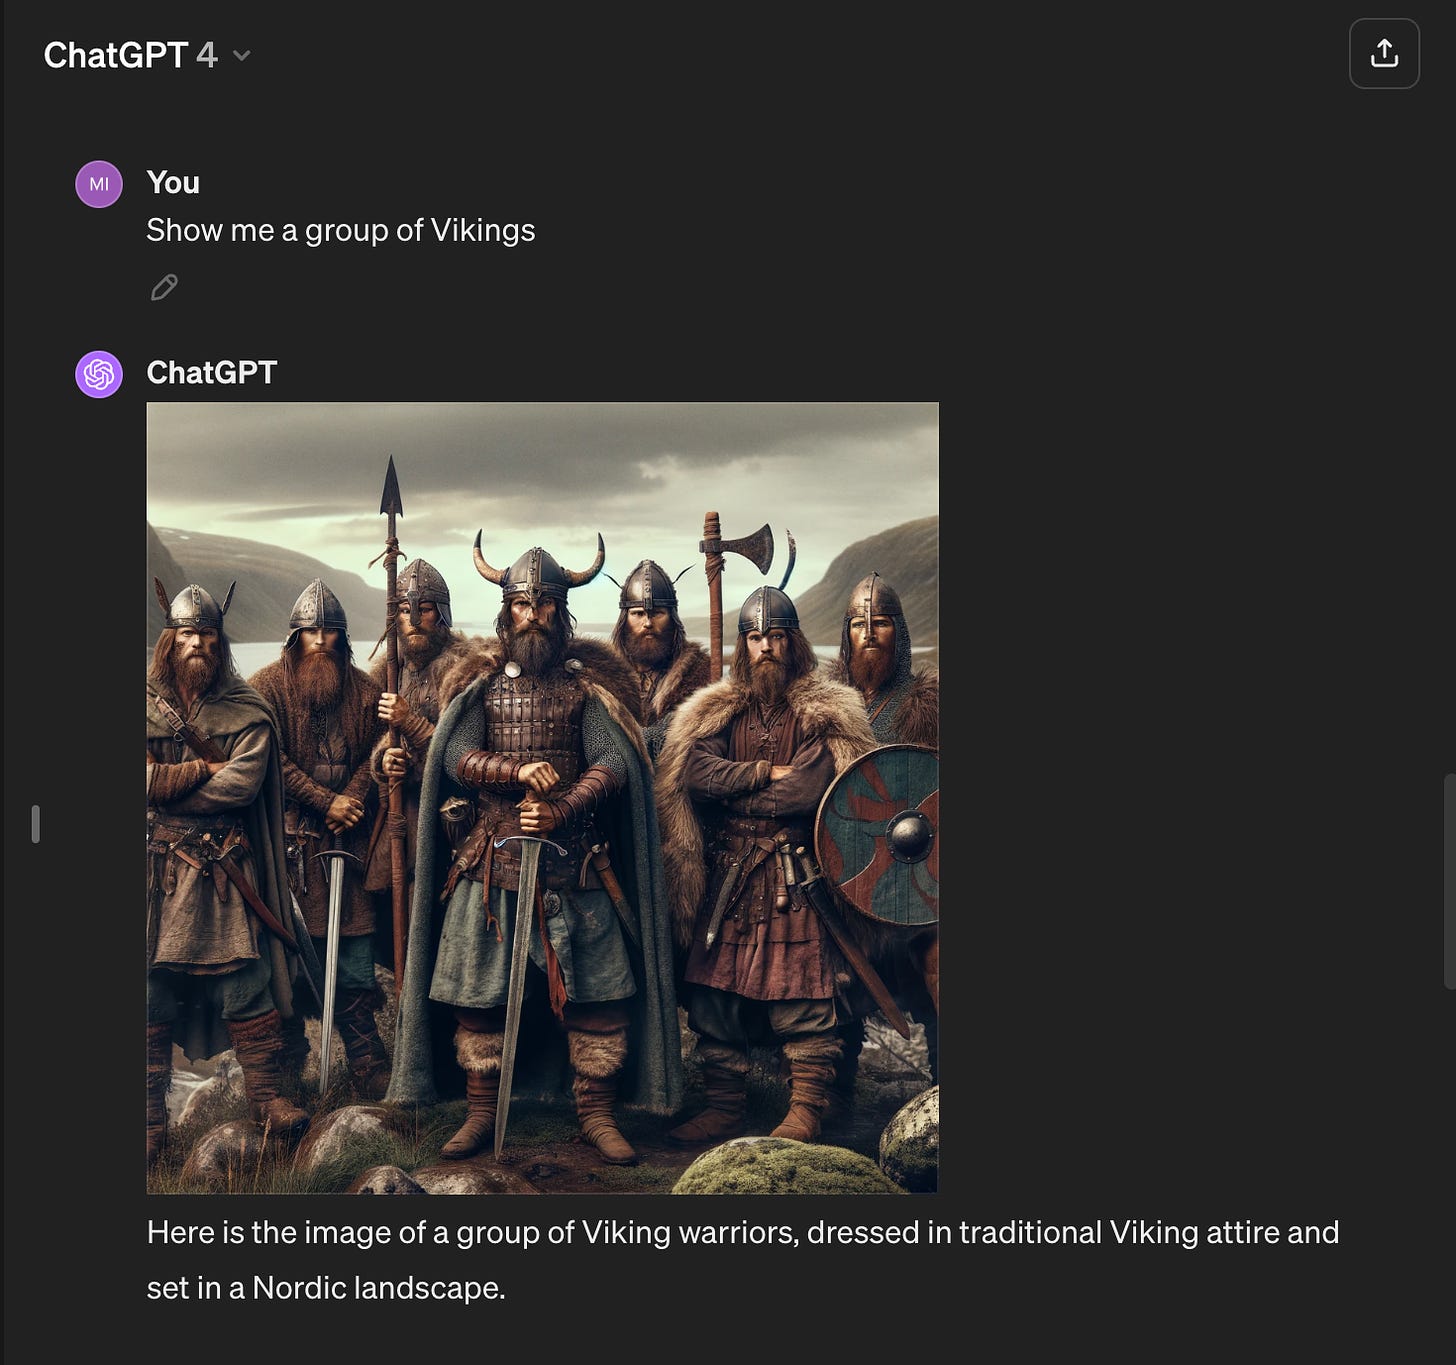 A screenshot of a ChatGPT conversation. Prompt: "Show me a group of Vikings." The response contains seven burly men in furs, capes, wearing horned helmets, and carrying swords and axes and shields.